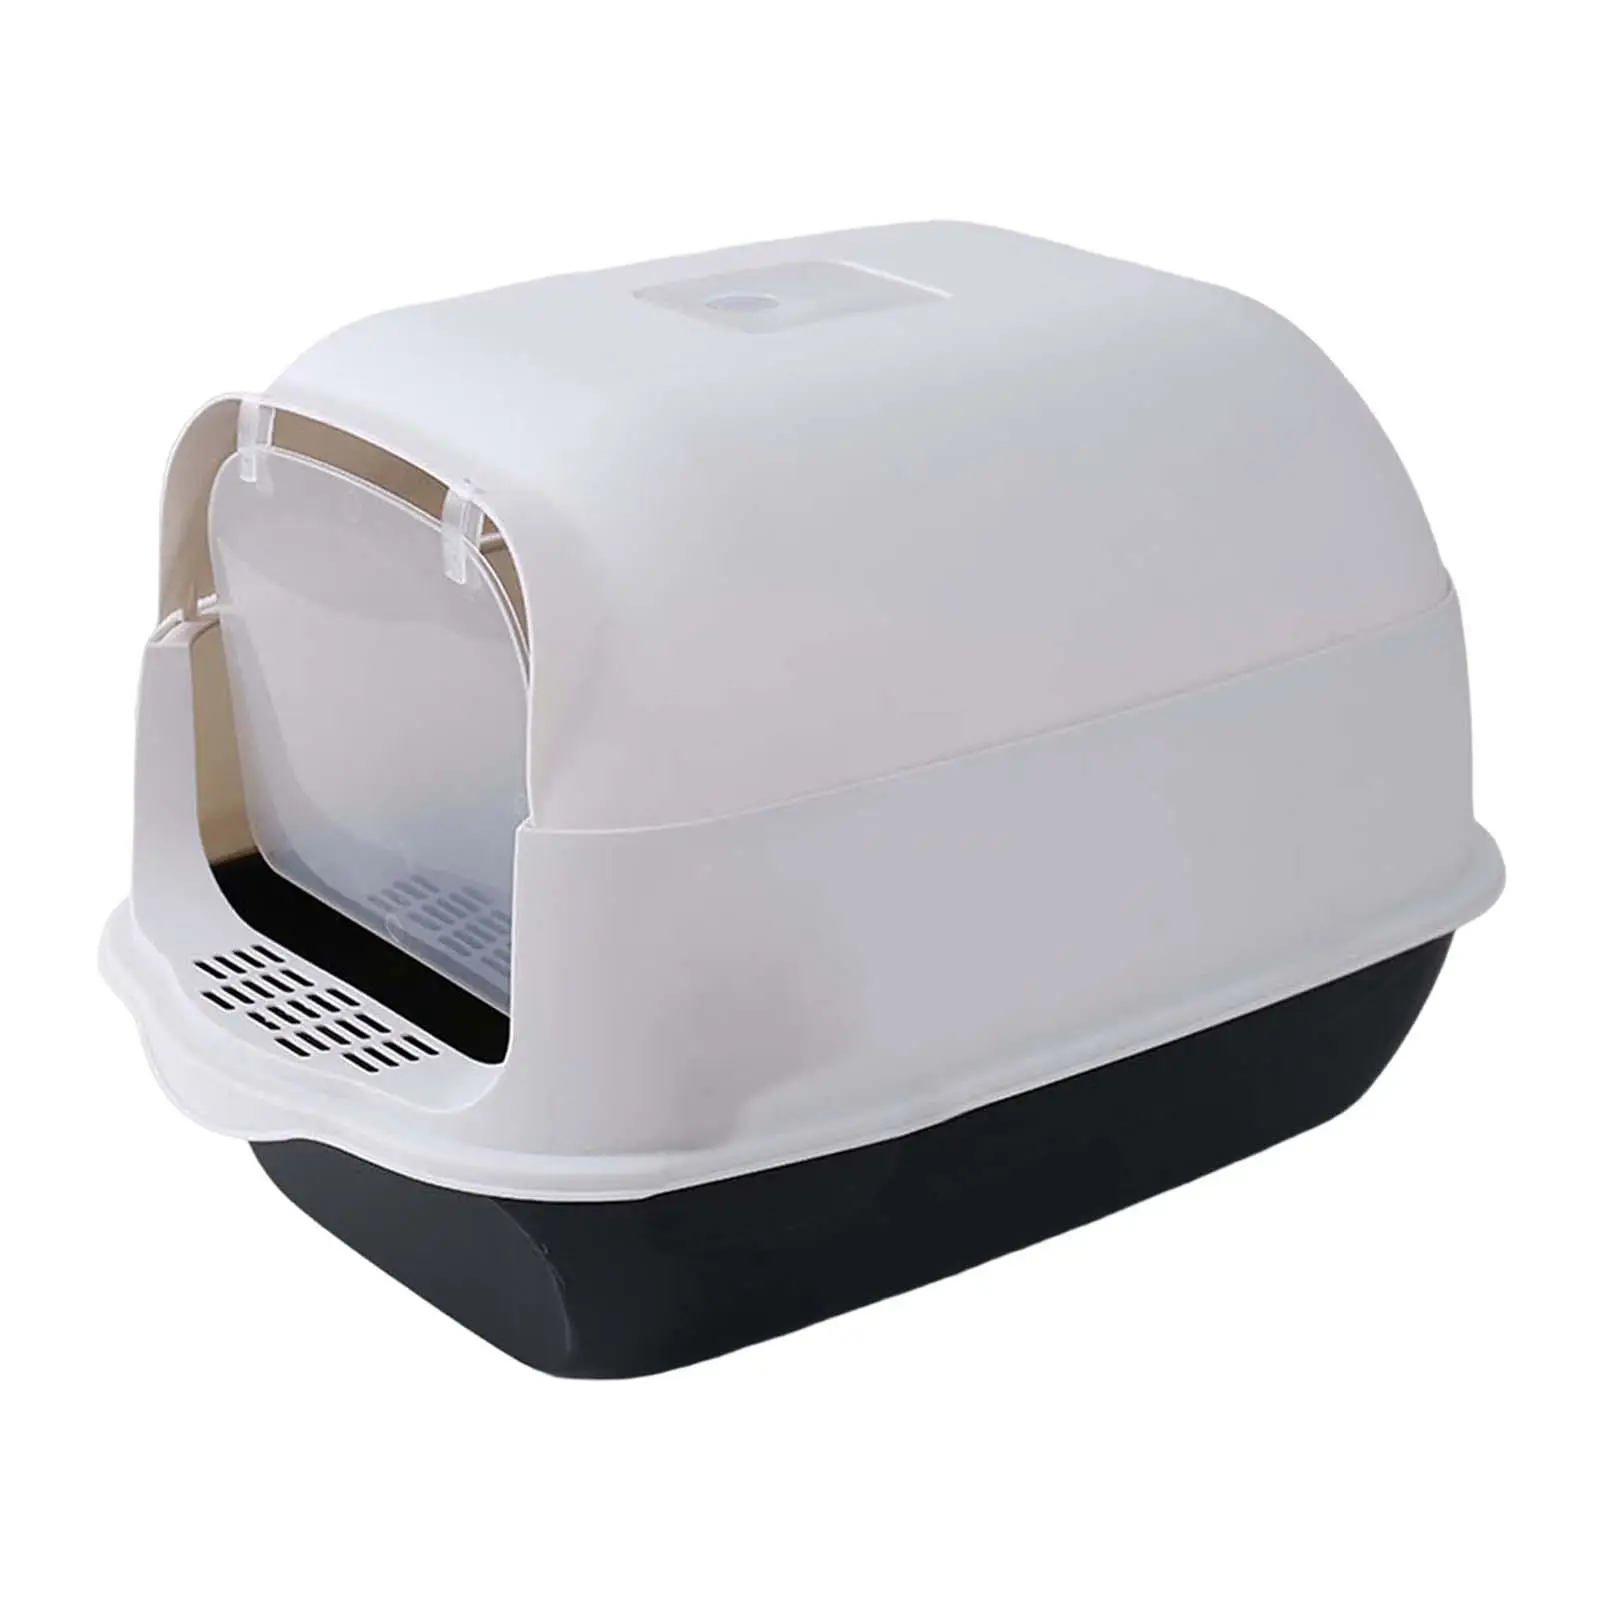 Large Cat Litter Box with Shovel with Door Cleaning House Supplies Training Toilet for Hamster Rabbit Kitten Outdoor Travel